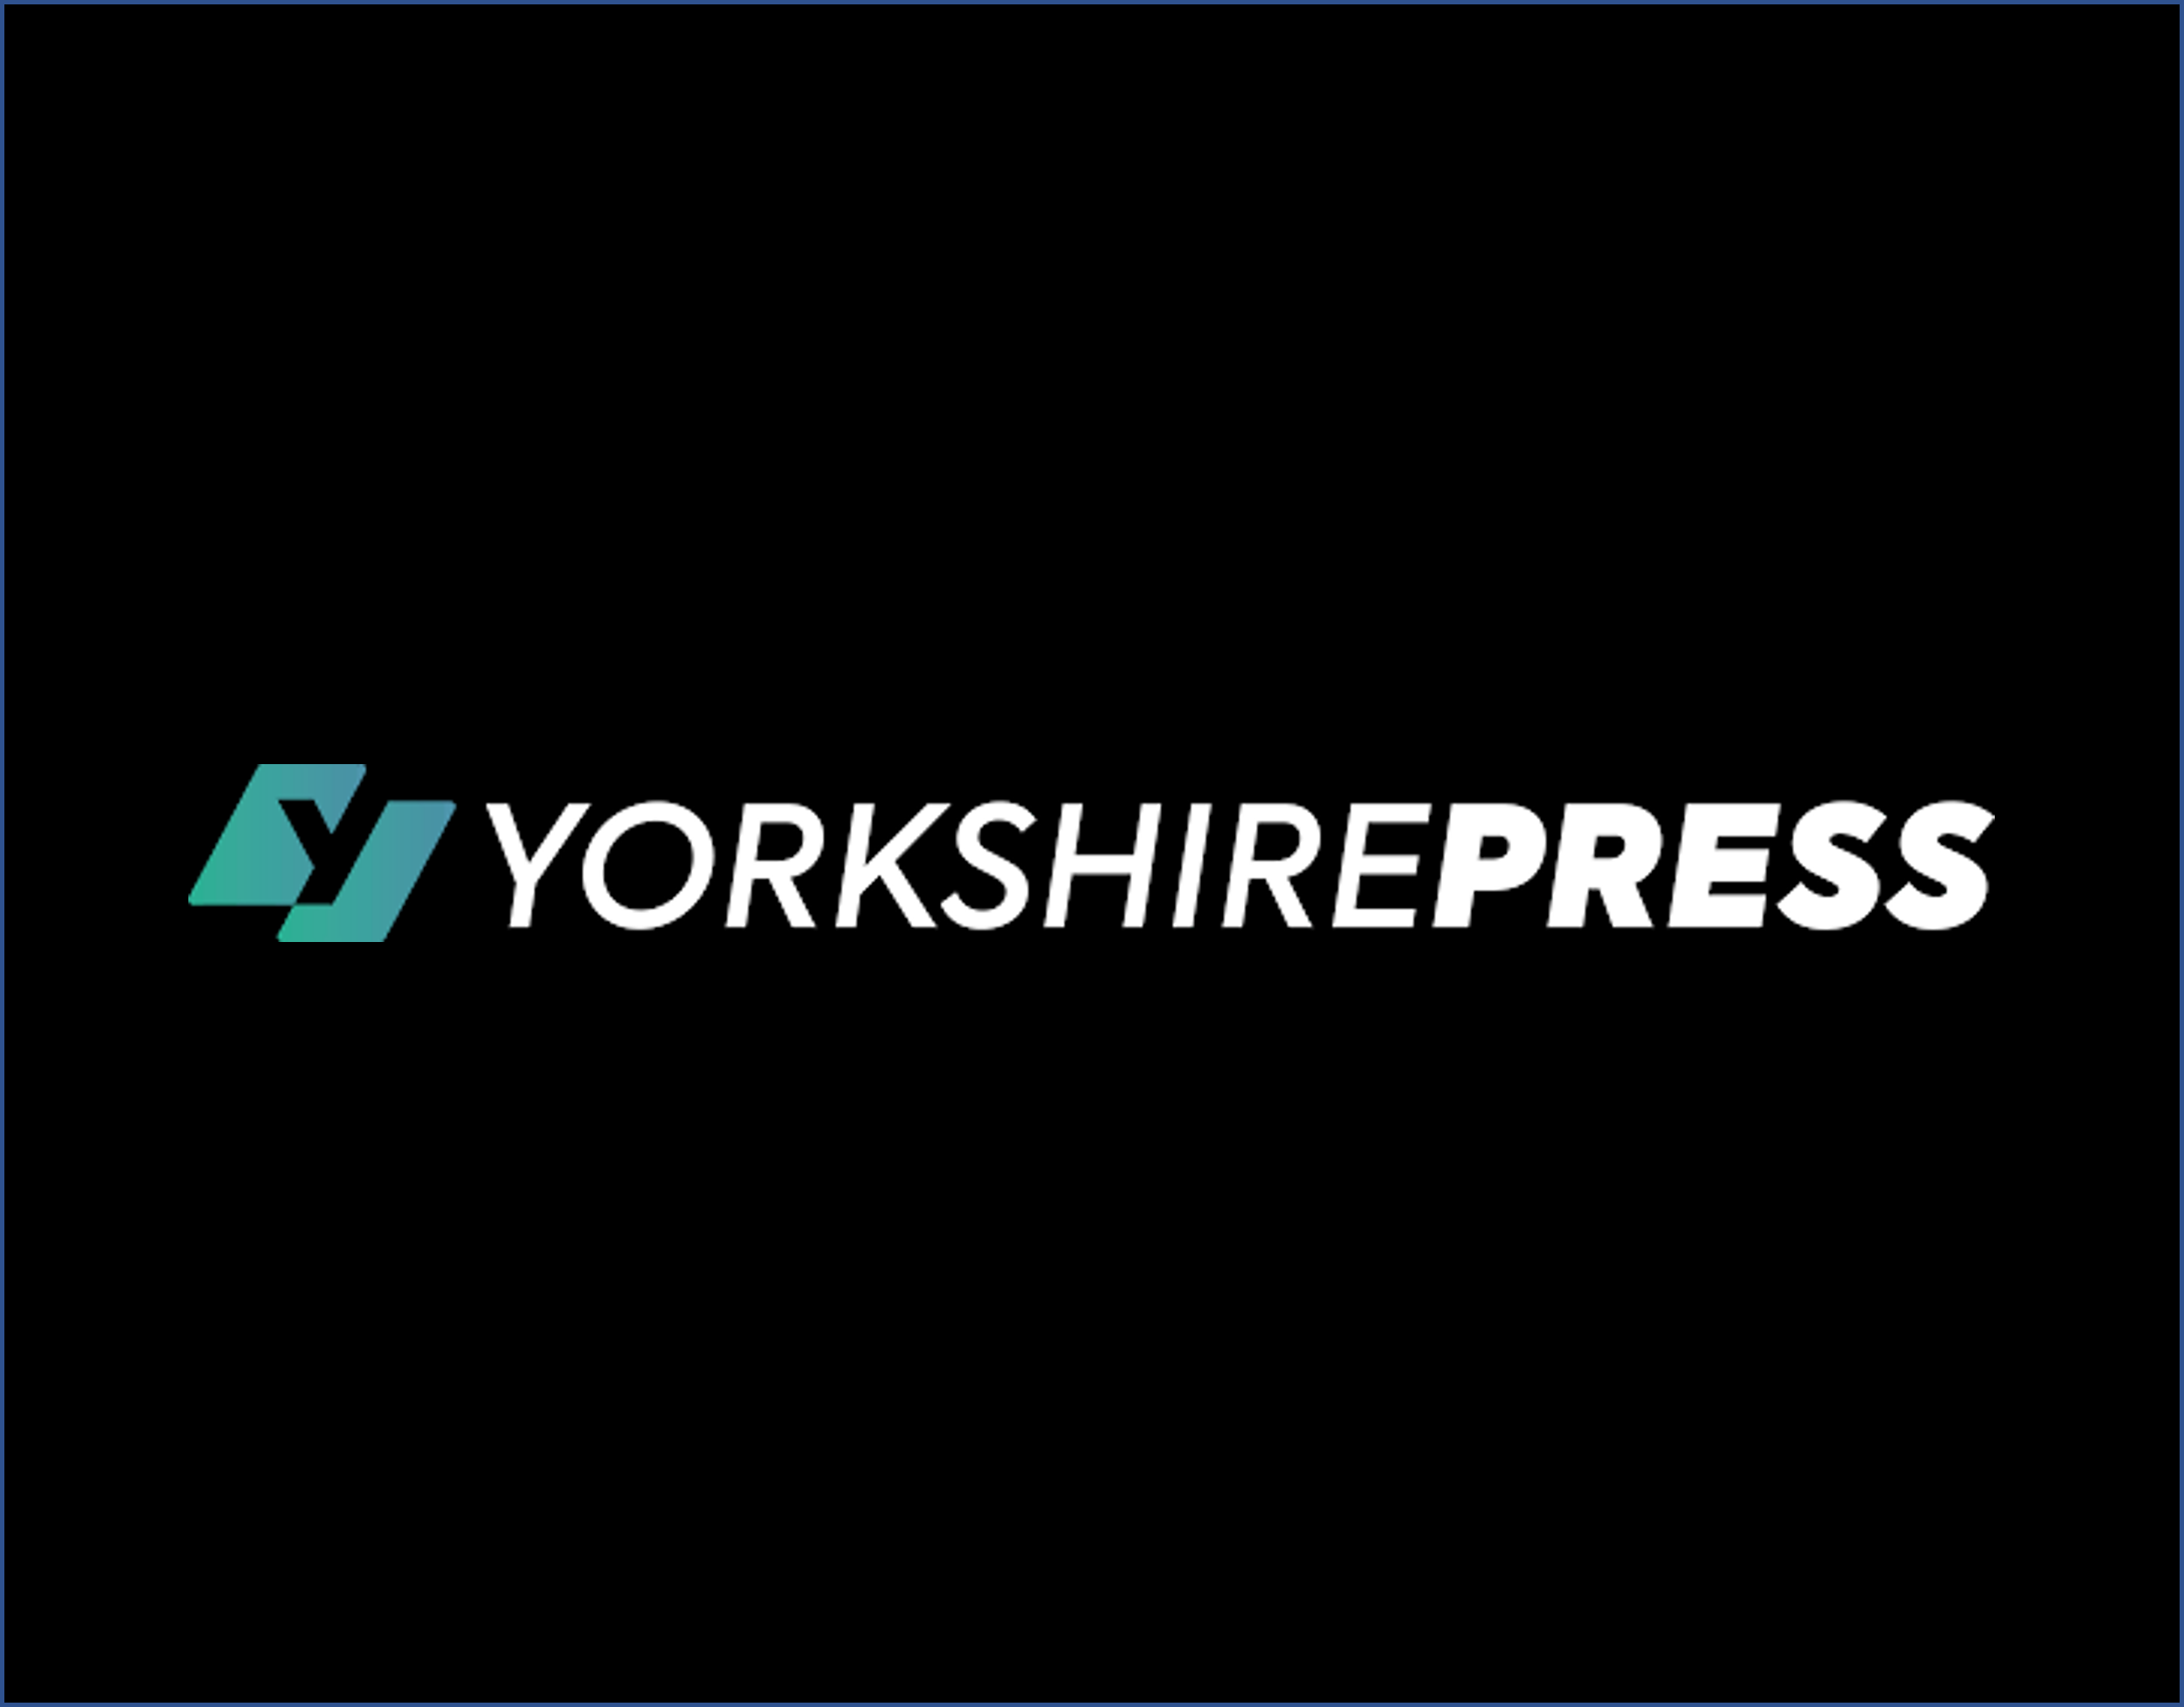 The-Yorkshire-Press